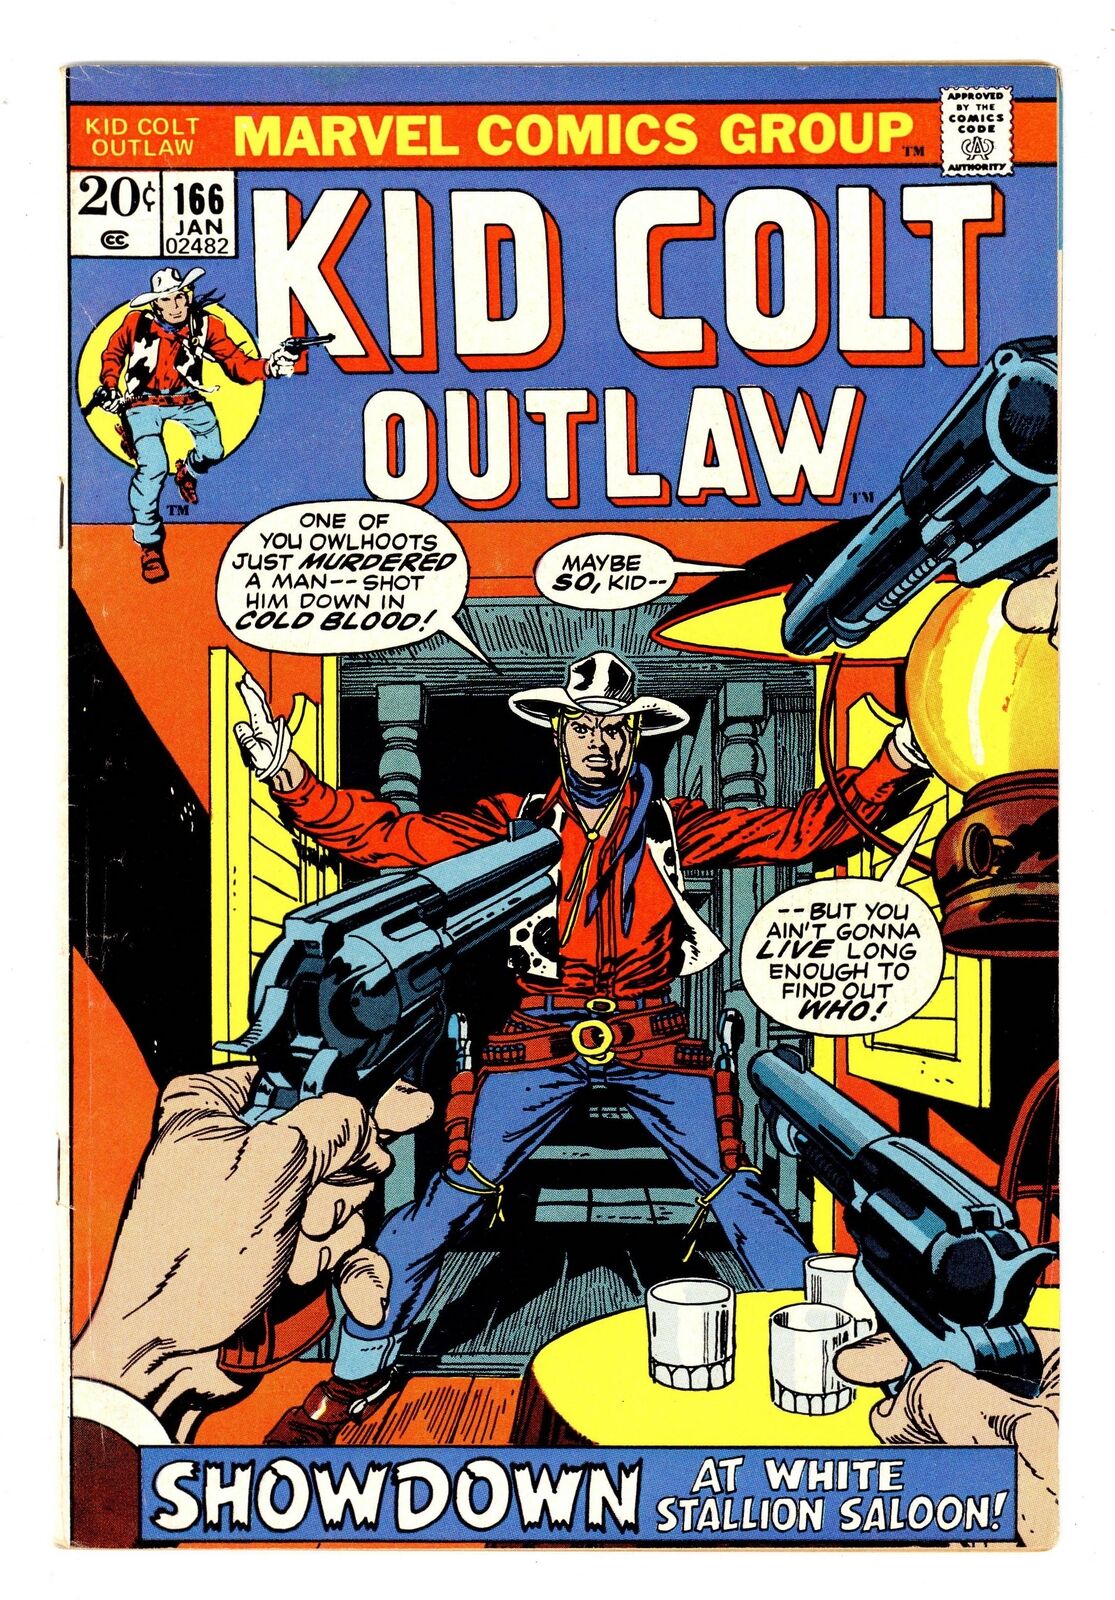 Kid Colt Outlaw National Diamond #166NDS VG+ 4.5 1973